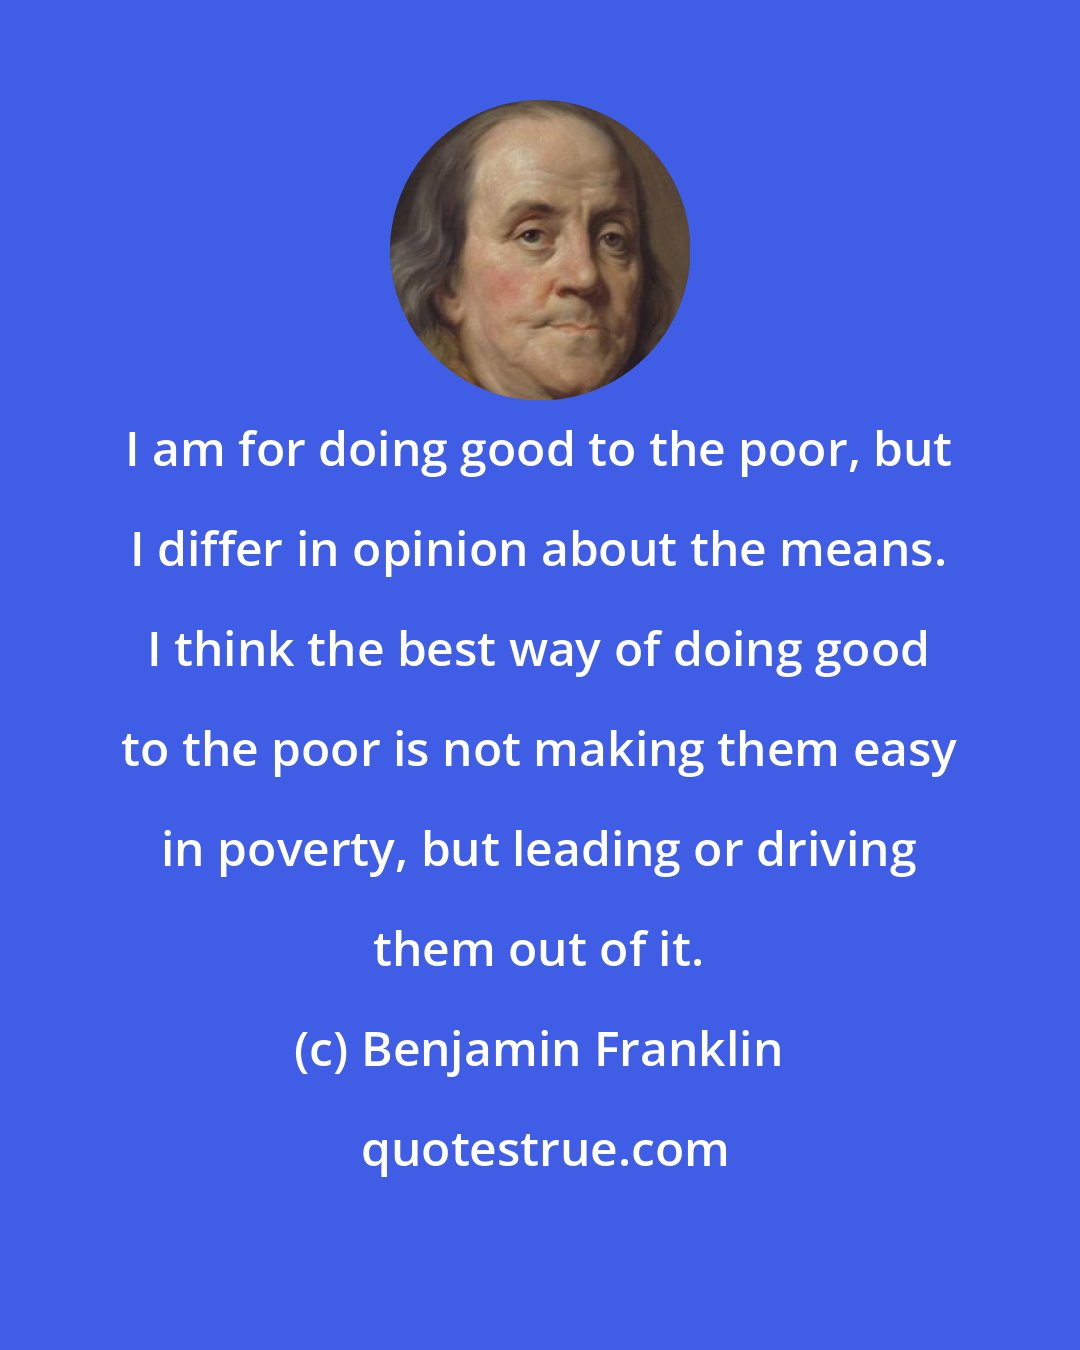 Benjamin Franklin: I am for doing good to the poor, but I differ in opinion about the means. I think the best way of doing good to the poor is not making them easy in poverty, but leading or driving them out of it.